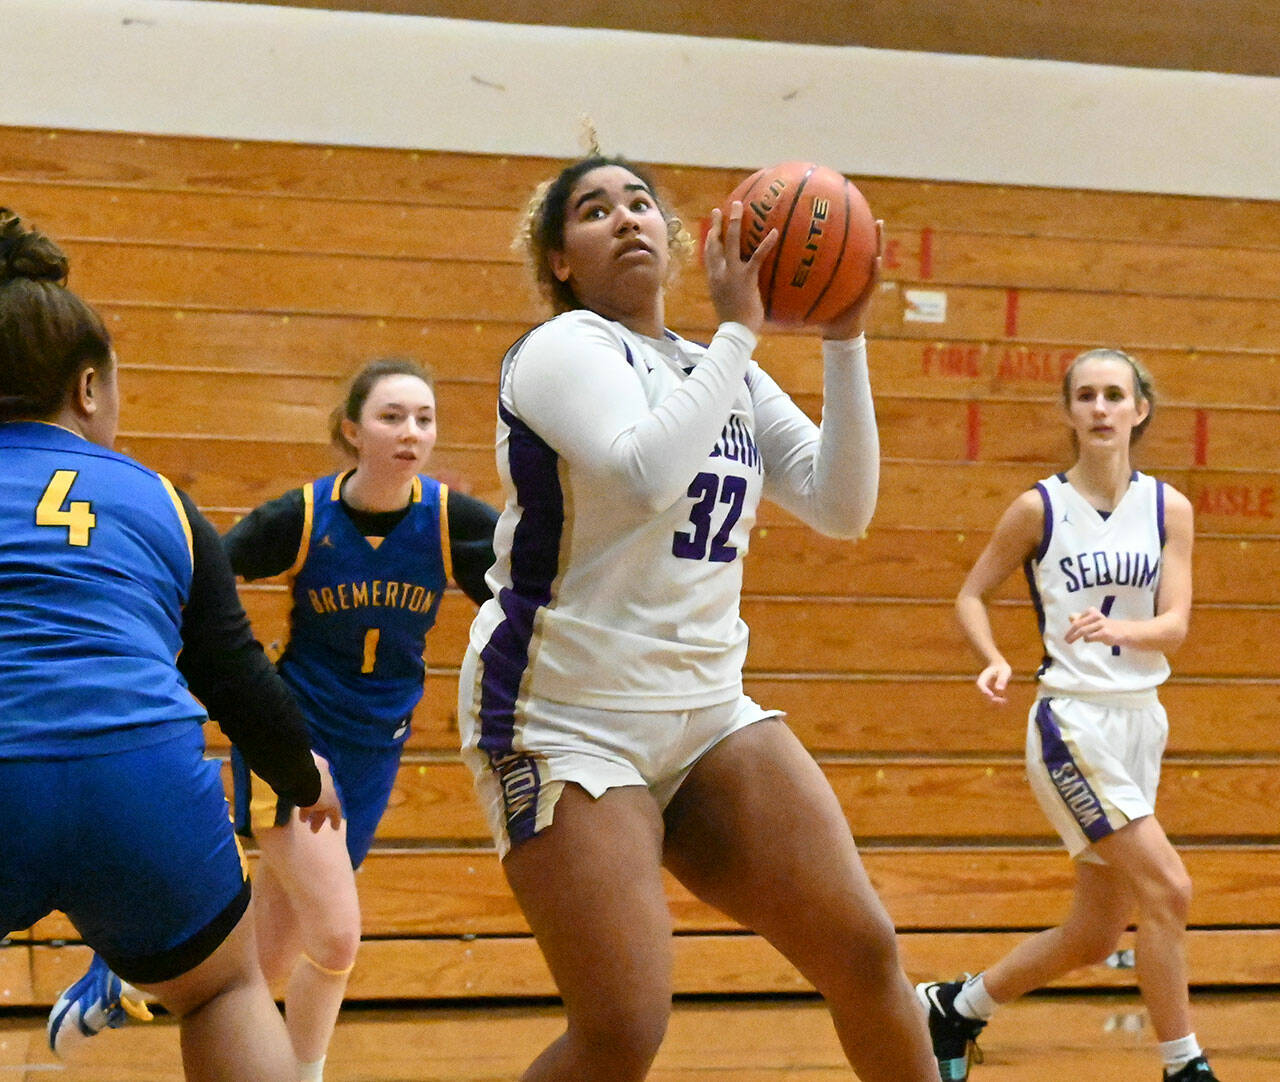 Sequim Gazette file photo by Michael Dashiell
Sequim’s Jelissa Julmist looks to put up a shot in the Wolves’ 71-46 win over Bremerton last season.